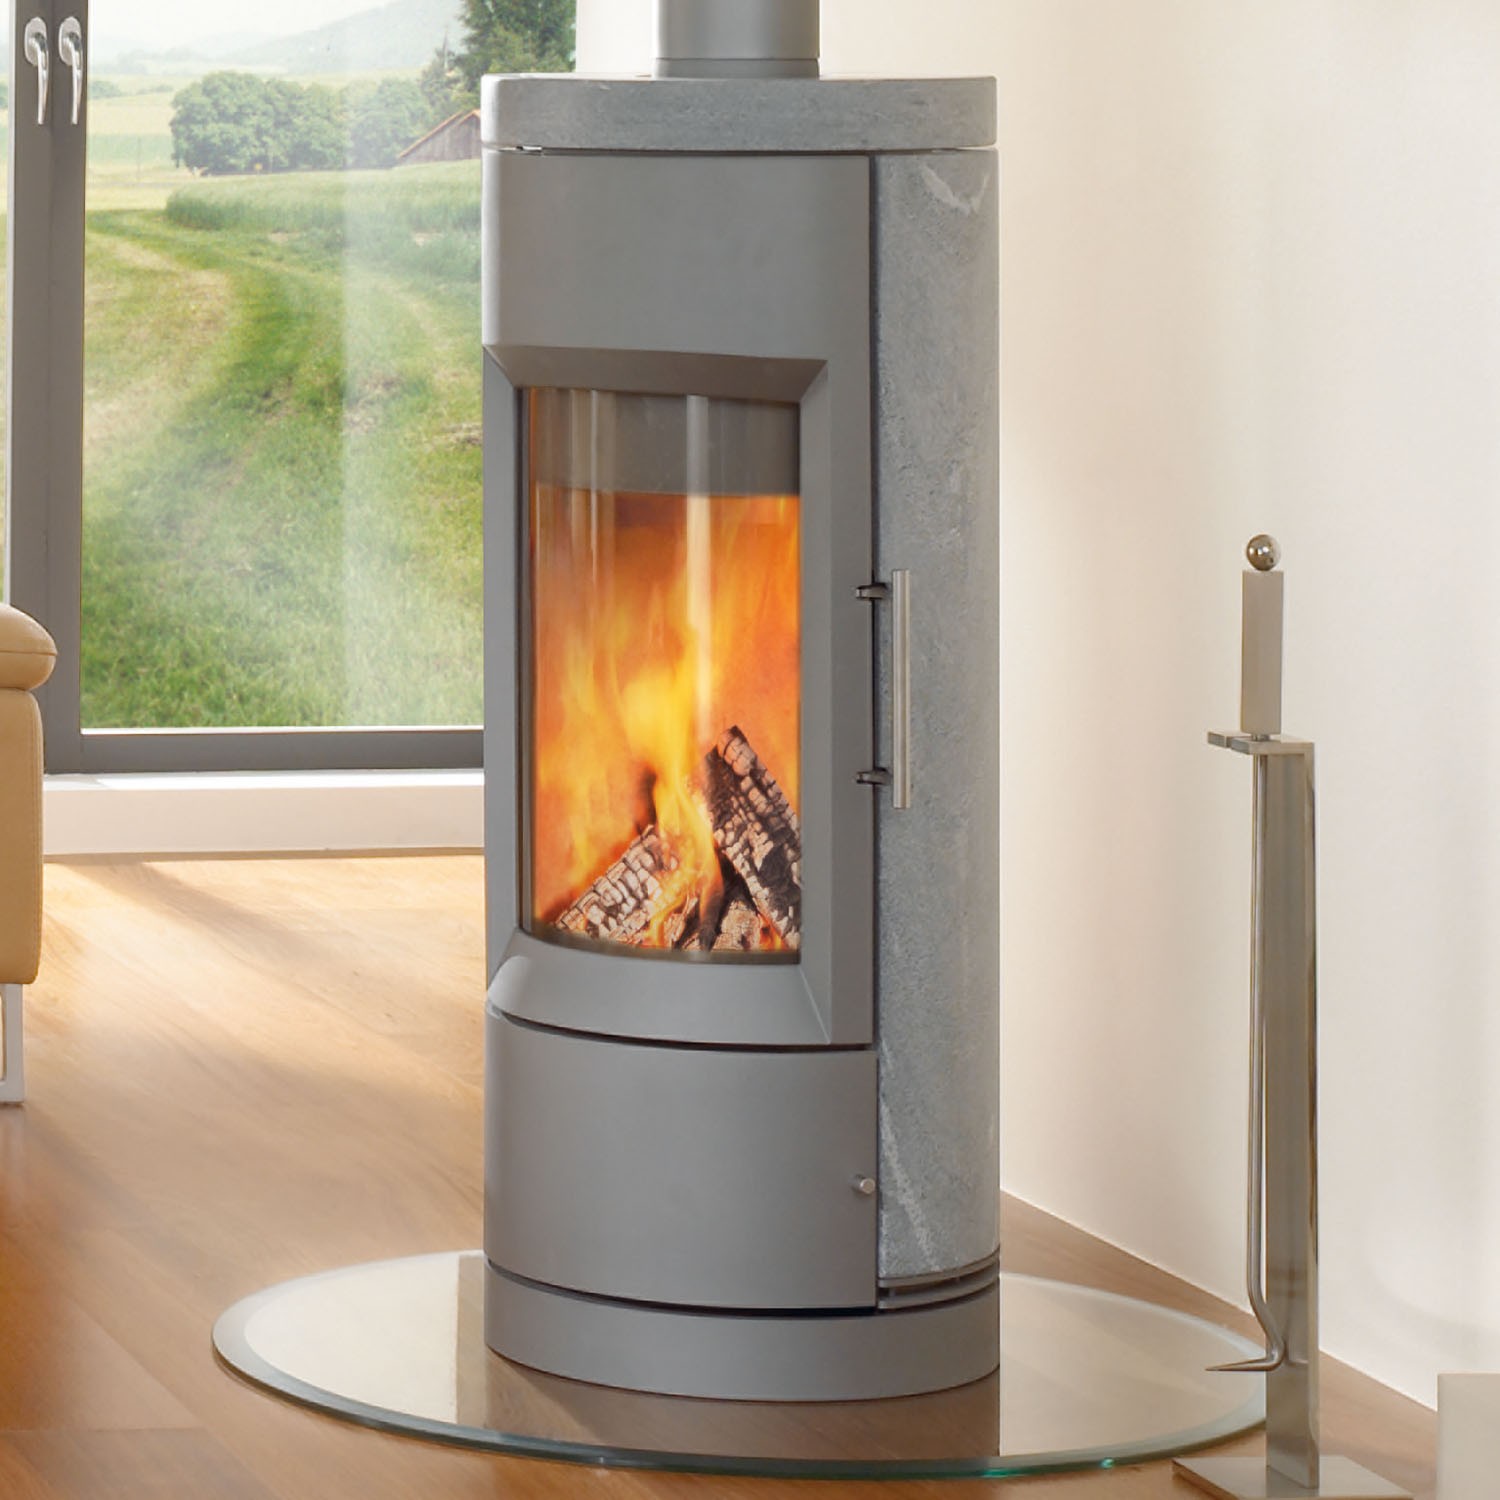 Modern round facing Bari 8170 Wood Stove with wall of windows to the left and white wall to the right with tools.